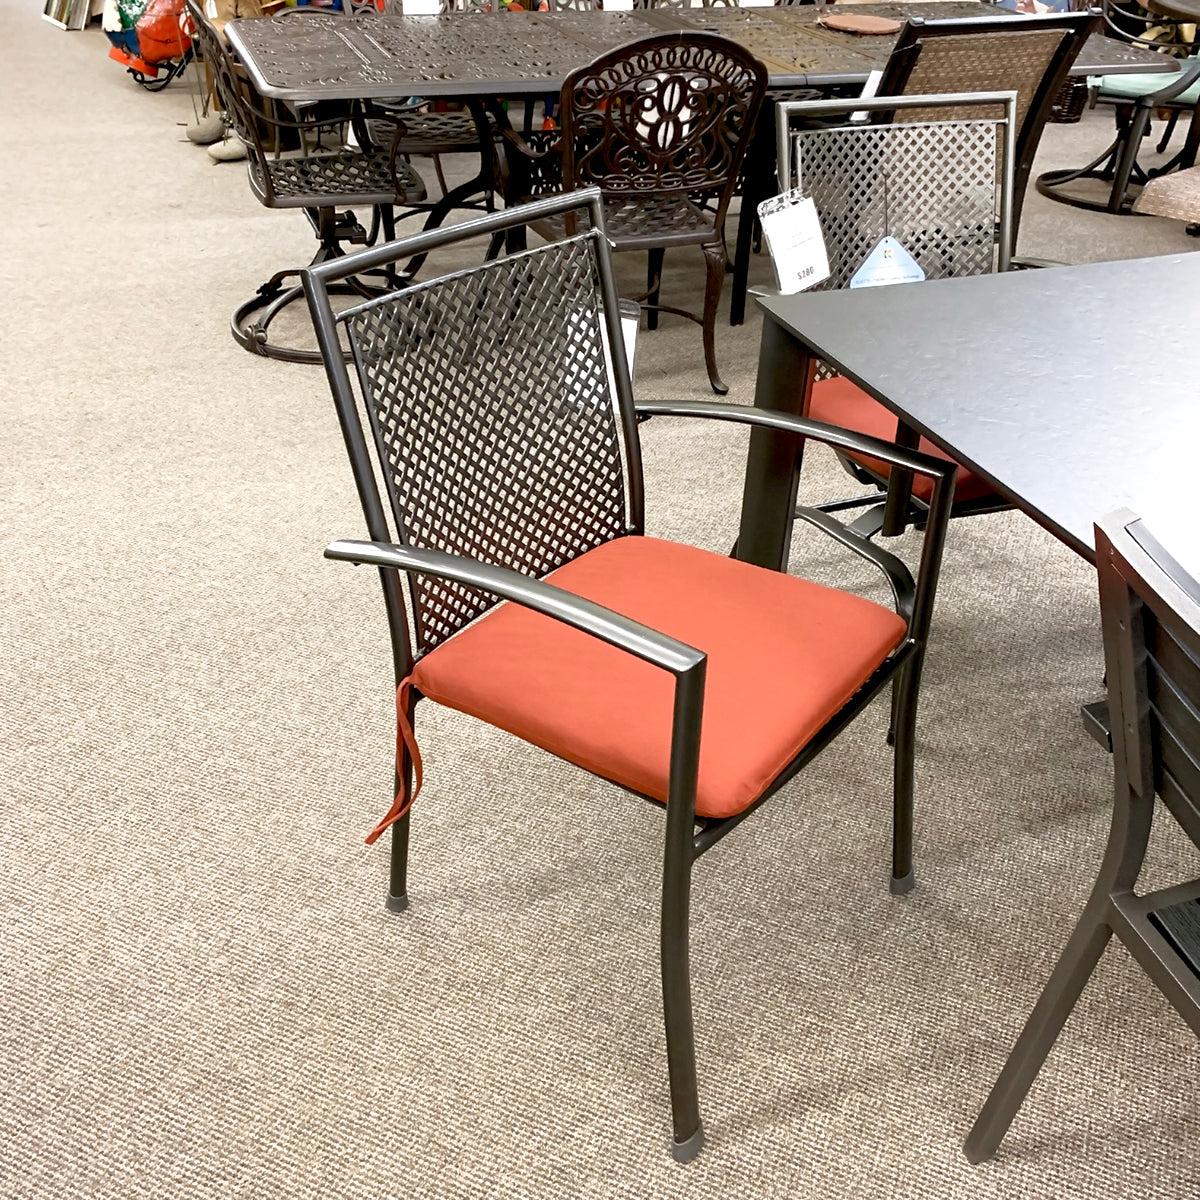 Reno Patio Dining Arm Chair is available at Jacobs Custom Living Spokane Valley showroom.